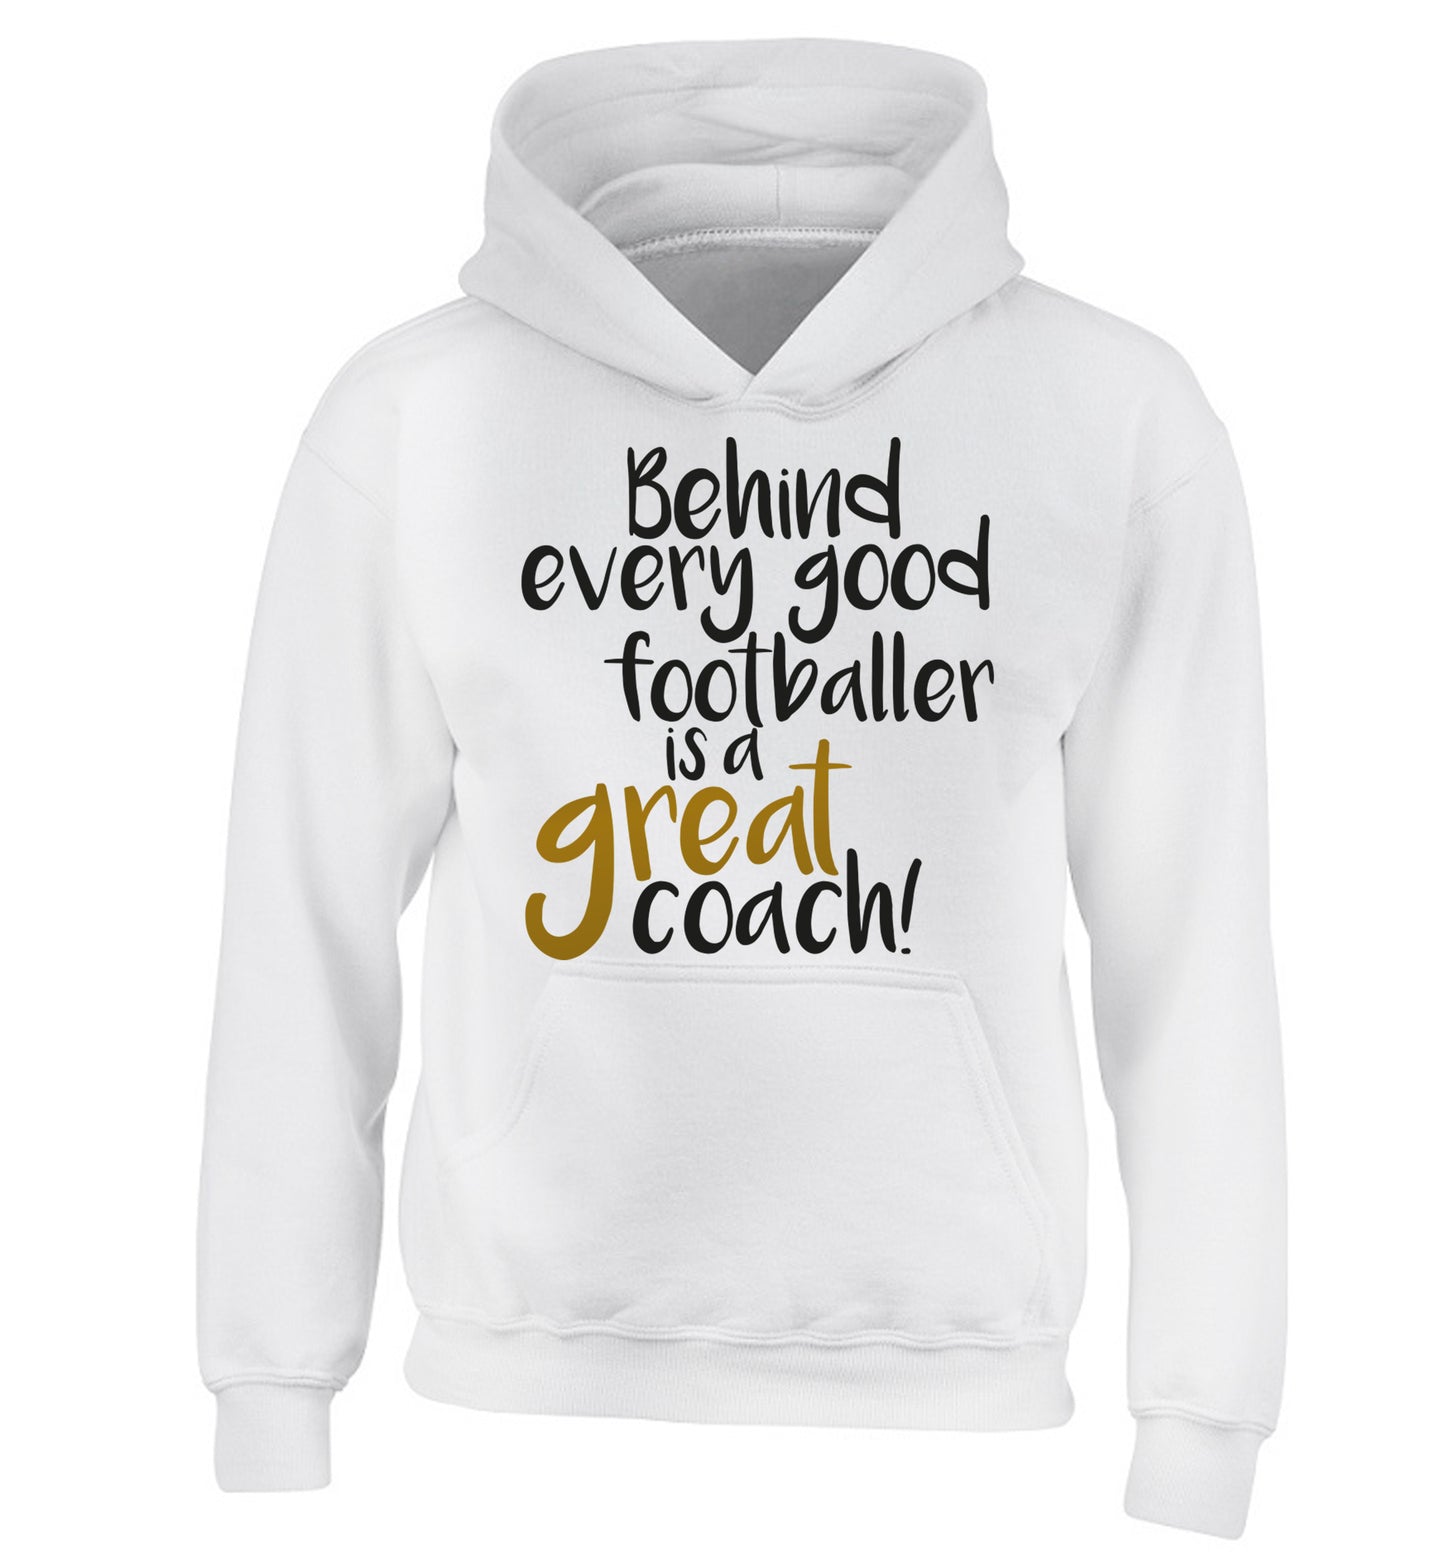 Behind every good footballer is a great coach! children's white hoodie 12-14 Years